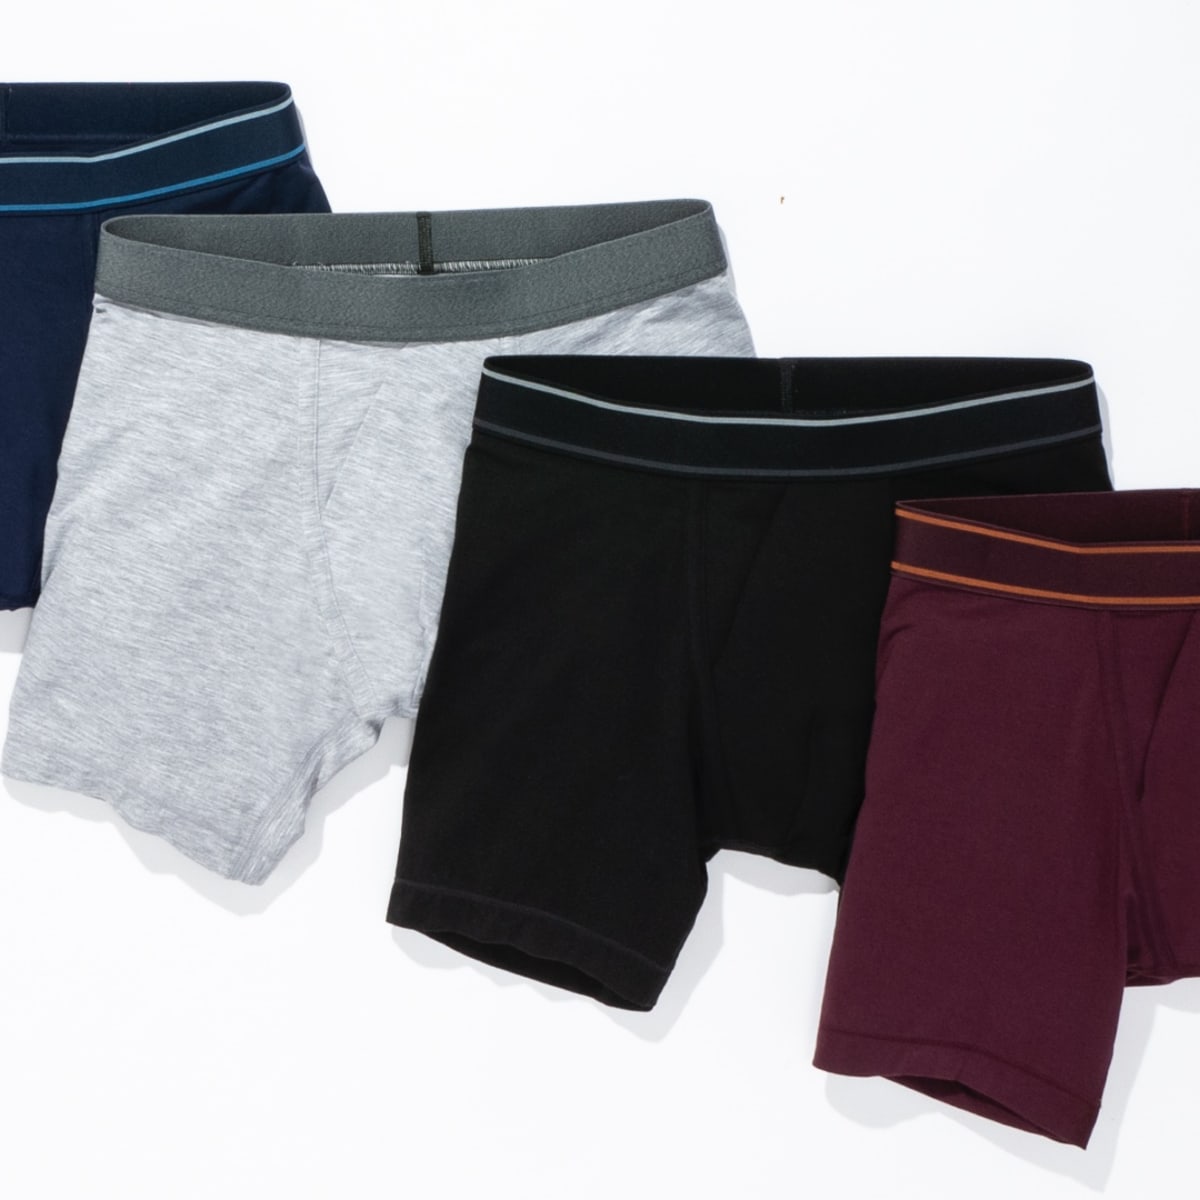 Bombas Introduces Underwear to Its Lineup